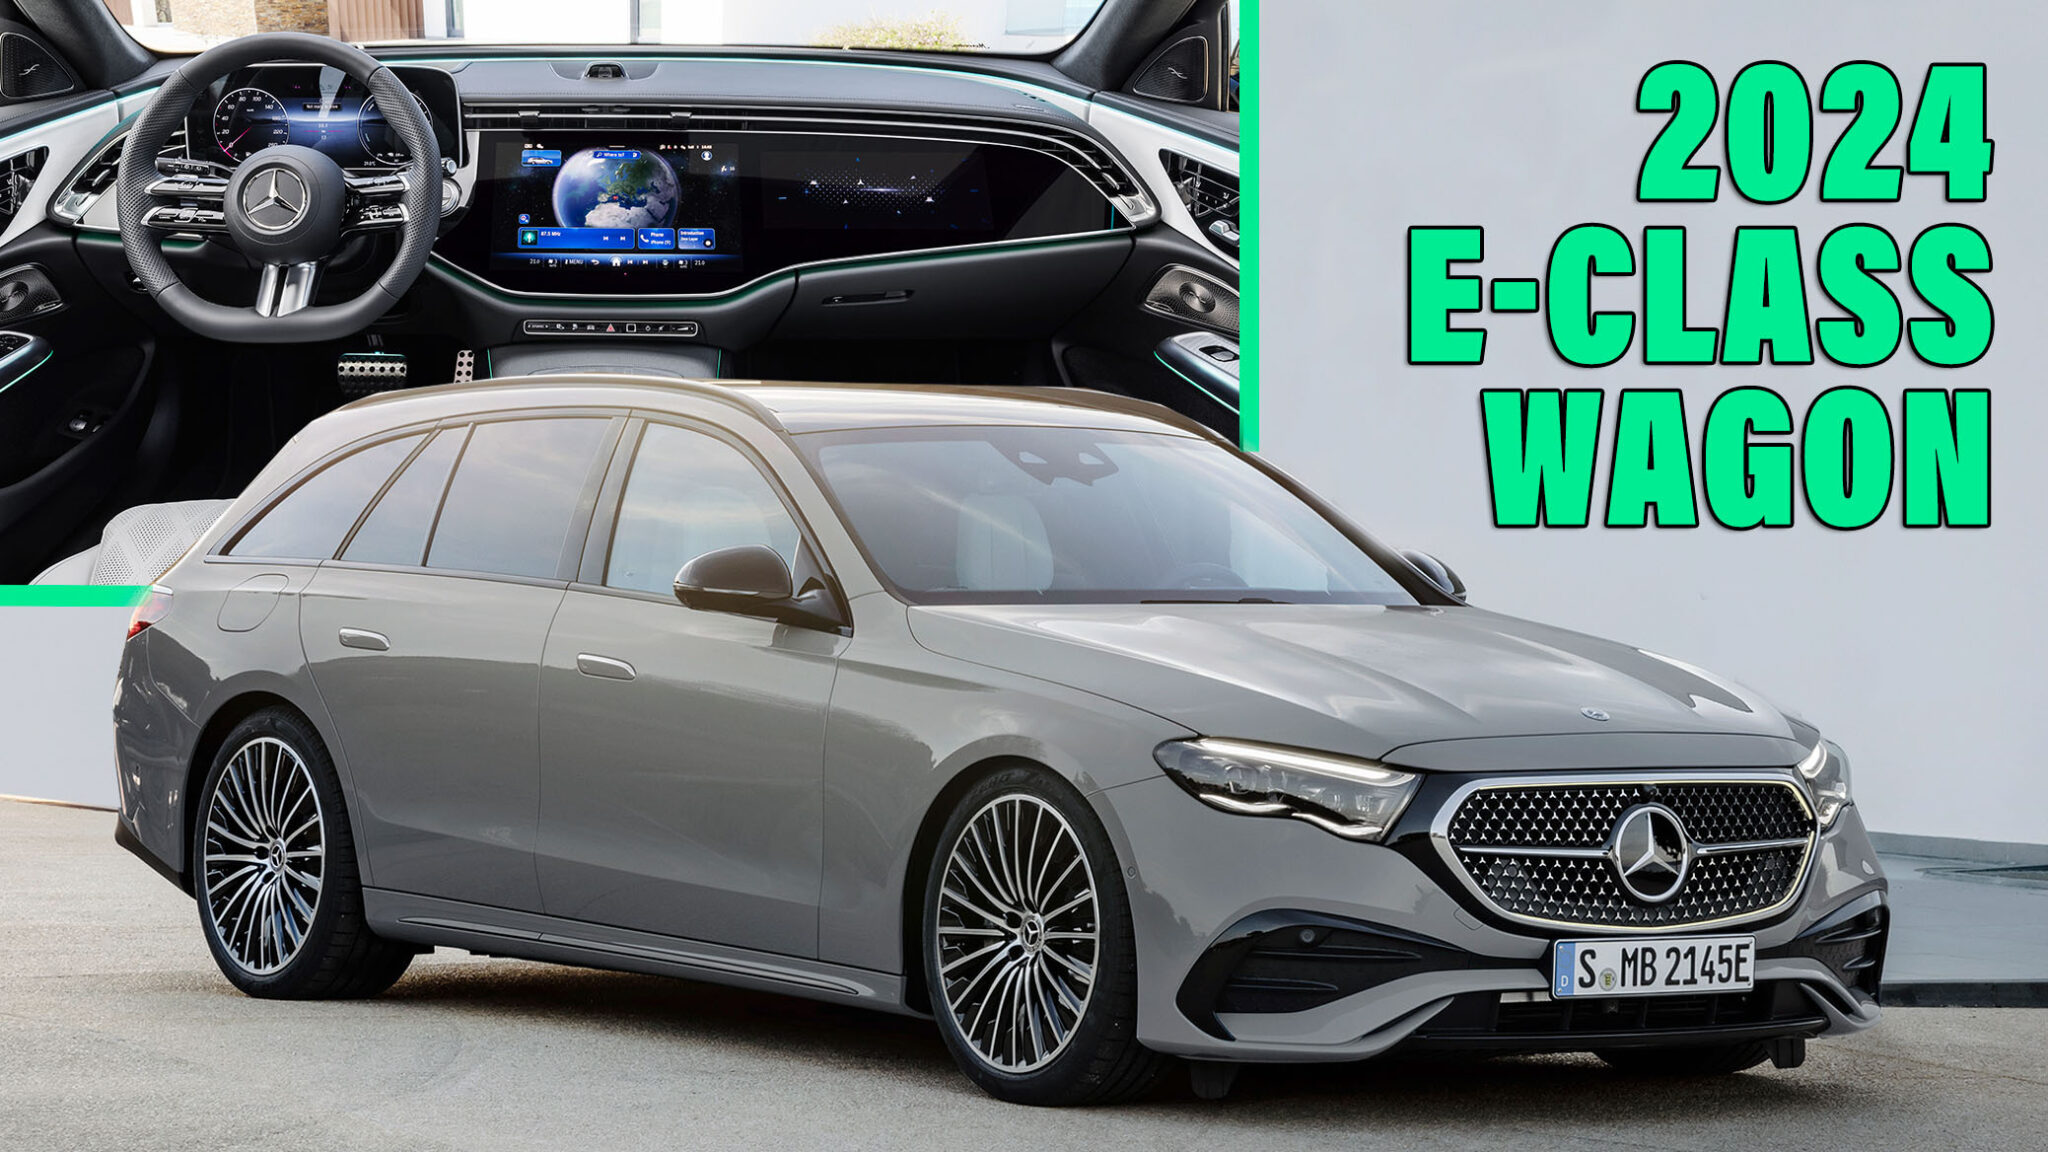 Stylish 2024 Mercedes EClass Estate Is A Wagon With A Wow Factor